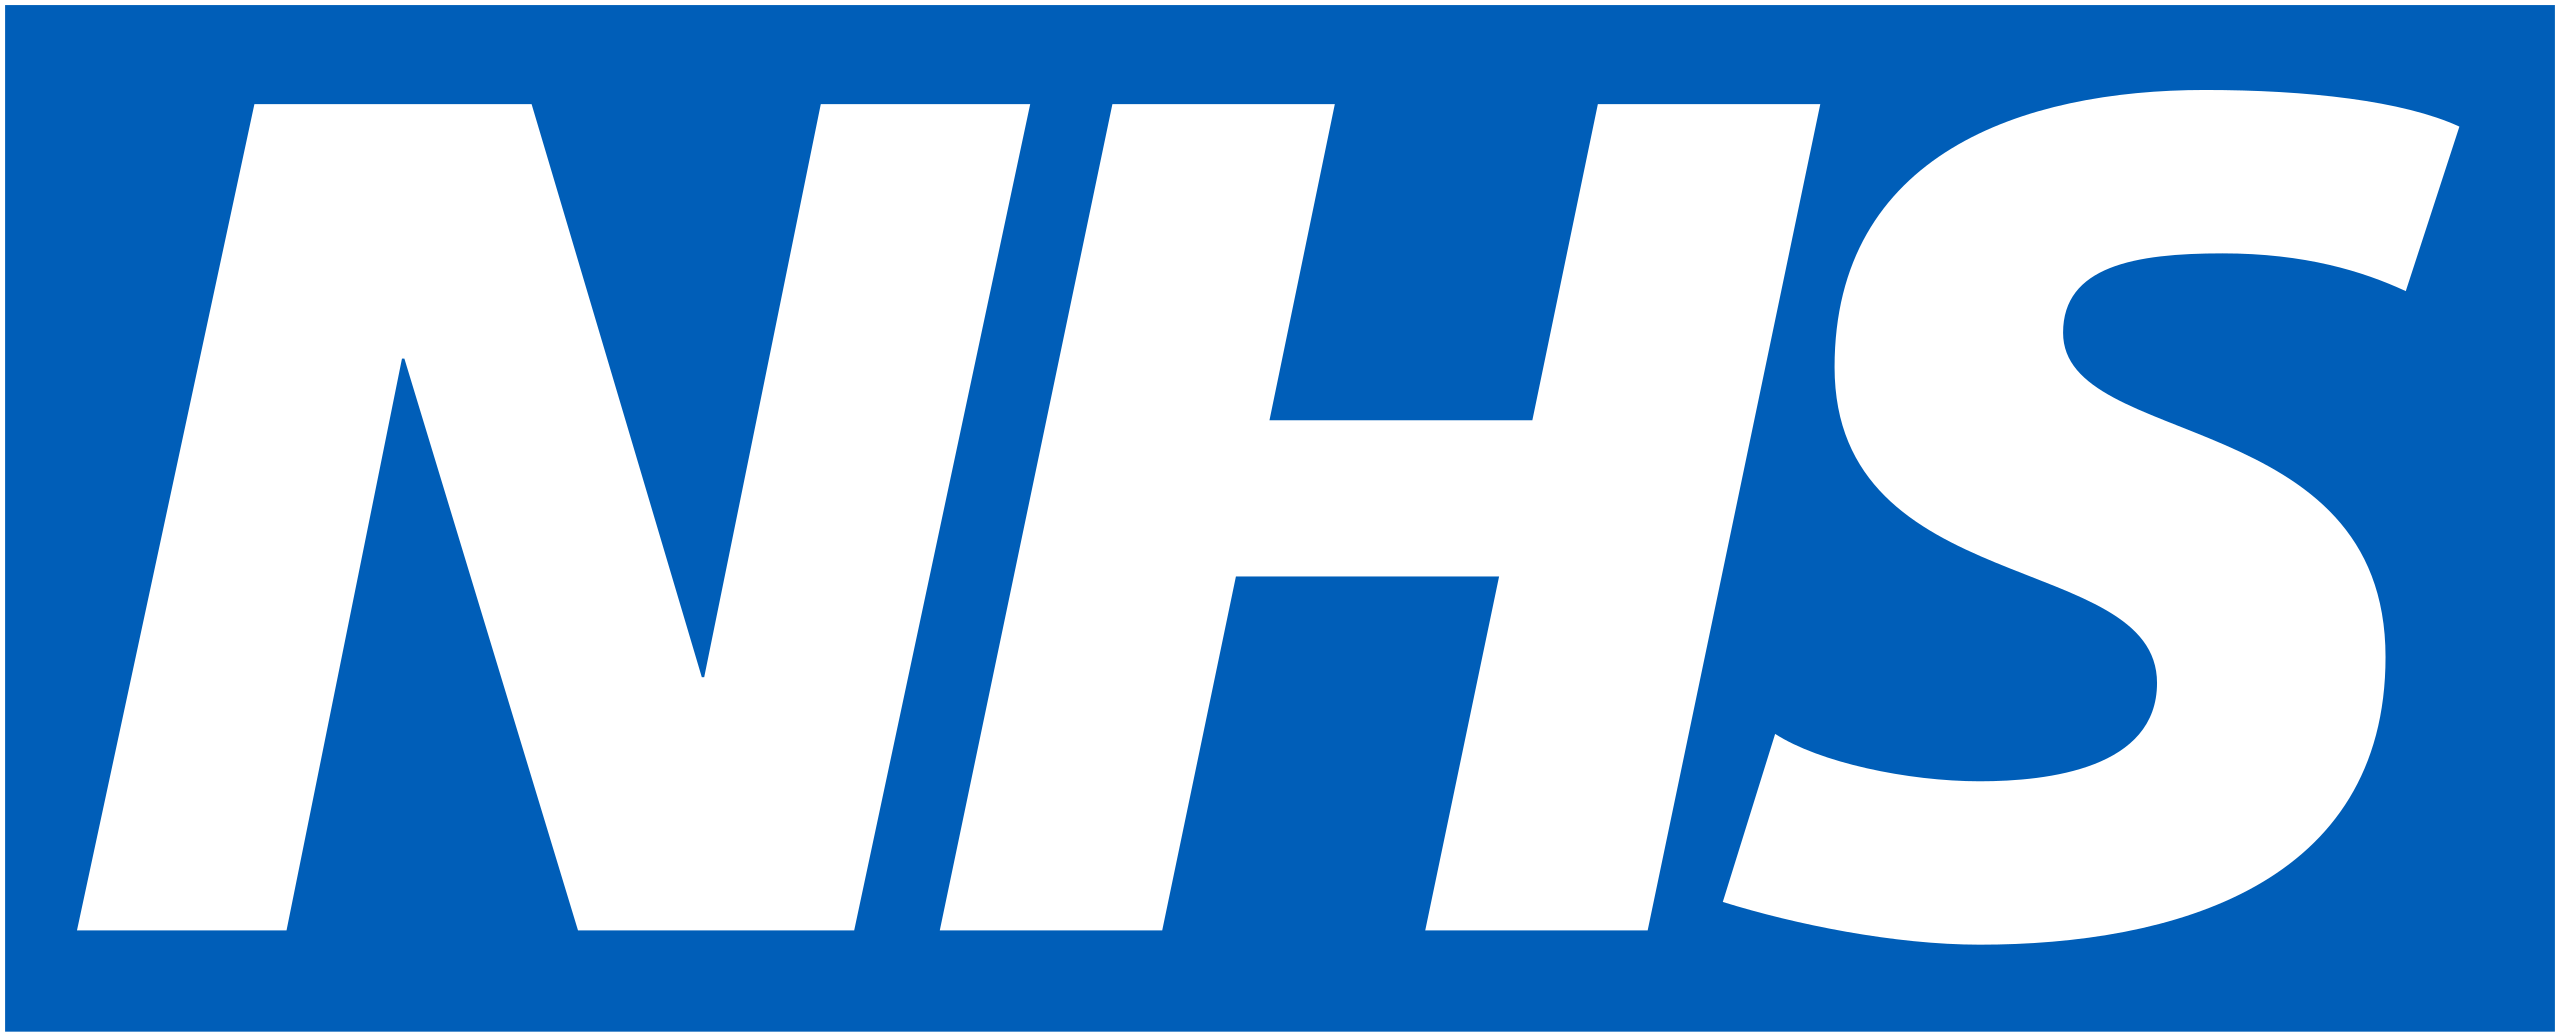 Most trans children are just going through a phase according to the NHS, according to the British Press who have definitely lied about what the NHS said. Here is the NHS logo.